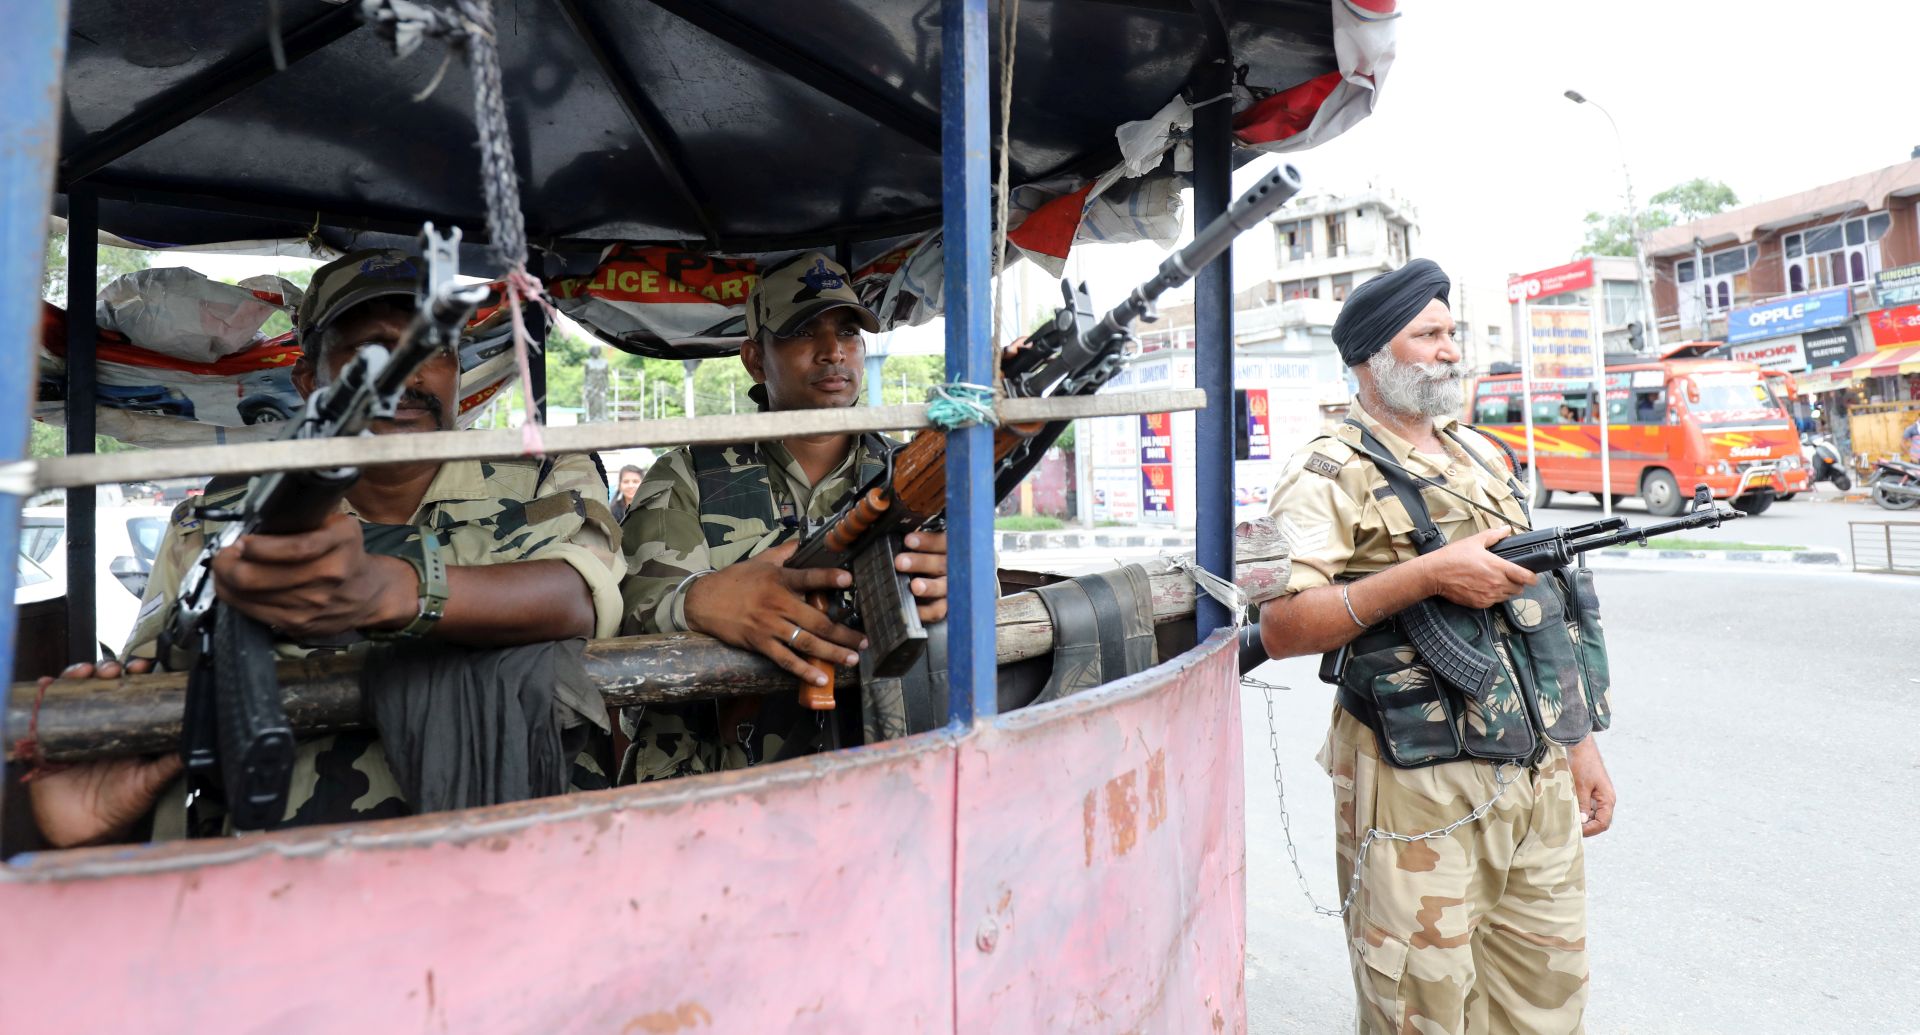 epa07772670 Indian paramilitary soldiers stand guard near barricade in Jammu, the winter capital of Kashmir, India, 14 August 2019. The Indian government on 05 August moved a resolution in the parliament that removed the special constitutional status granted to the disputed Kashmir region. The Indian Kashmir region has been under heavy lockdown since then and security is on the high alert ahead of Independence Day celebrations across the country.  EPA/JAIPAL SINGH